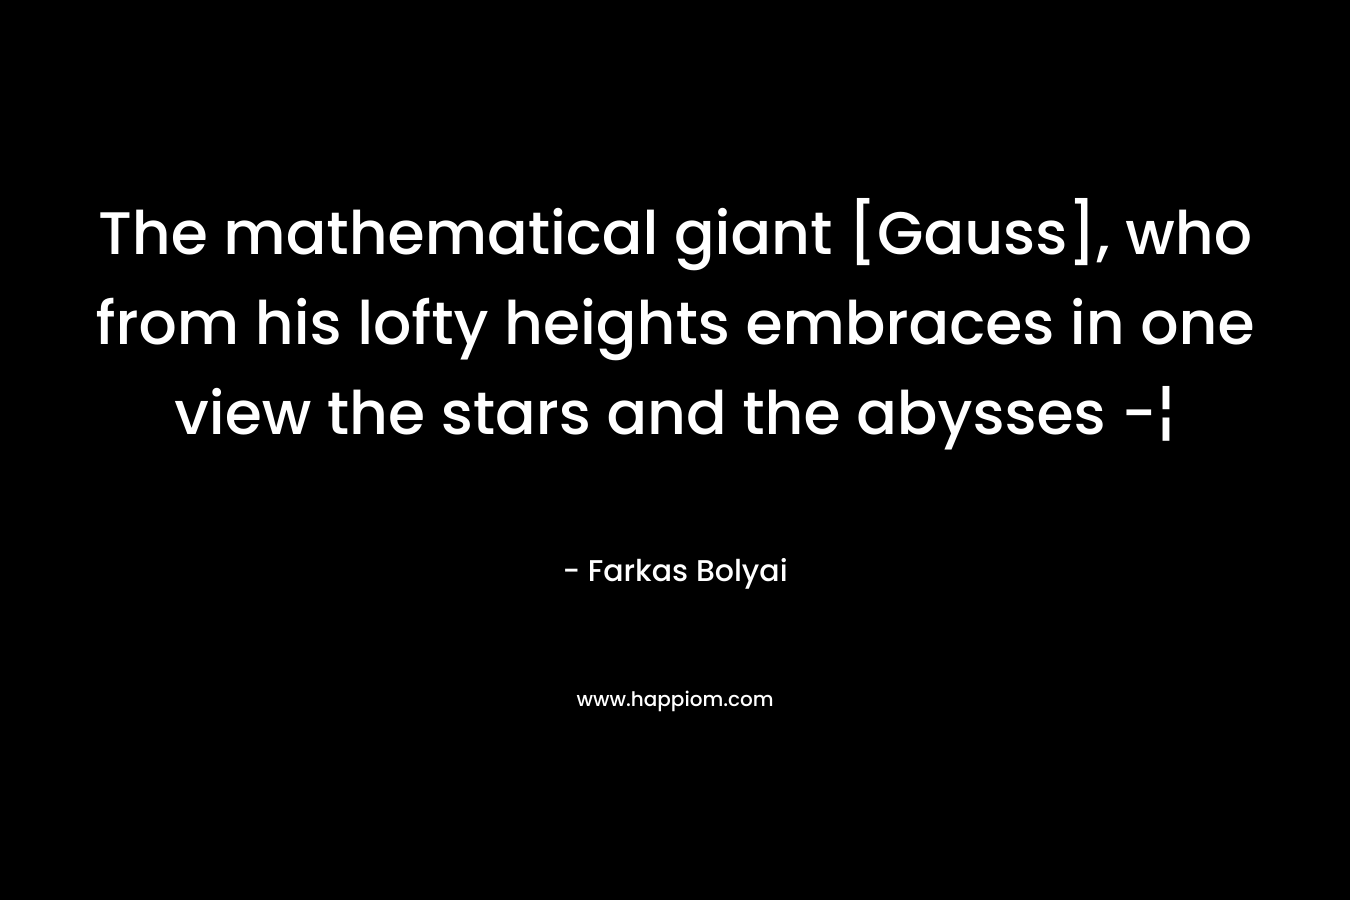 The mathematical giant [Gauss], who from his lofty heights embraces in one view the stars and the abysses -¦ – Farkas Bolyai